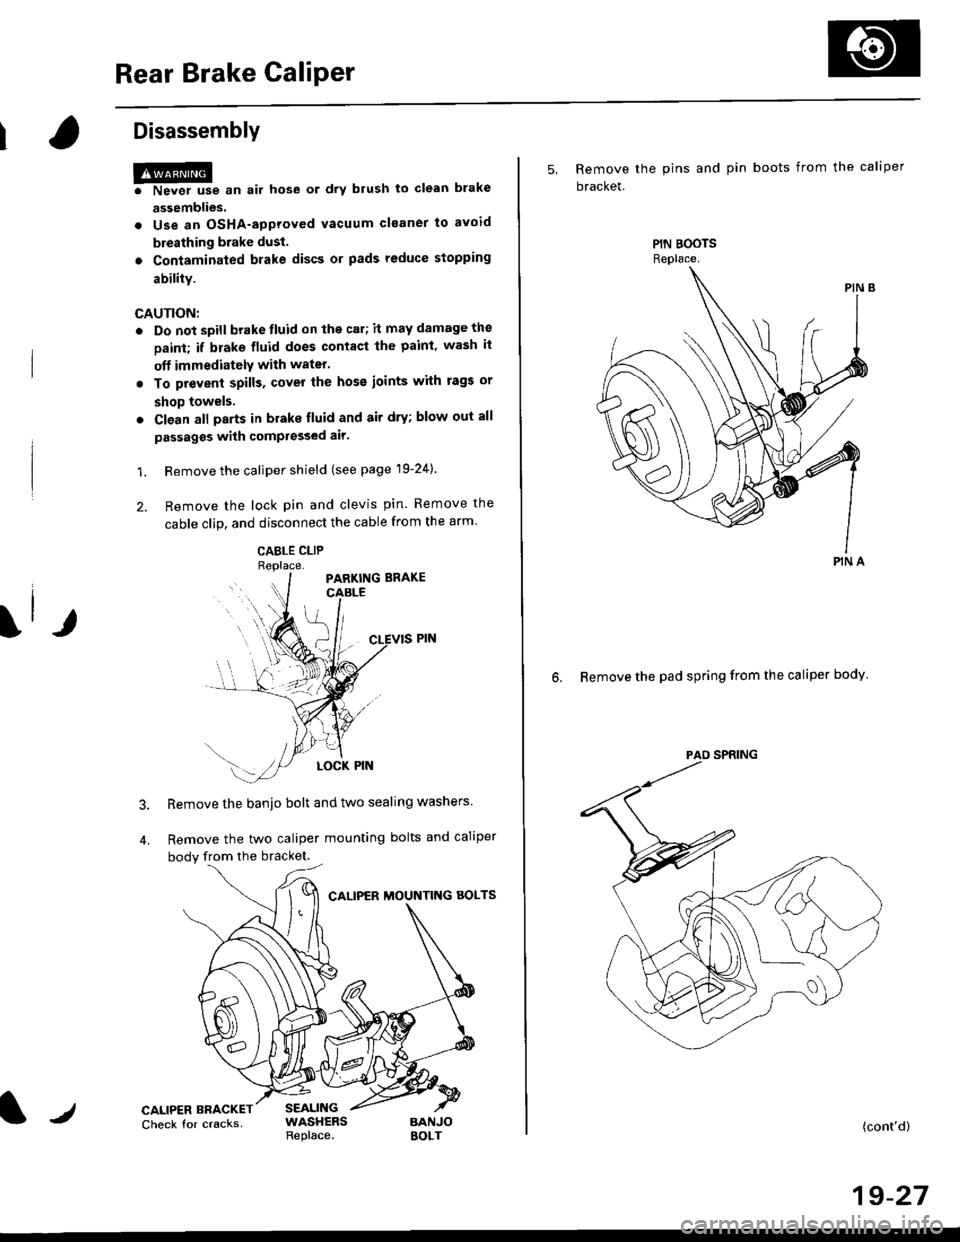 HONDA CIVIC 1999 6.G User Guide Rear Brake Caliper
Disassembly
@f l,lever use an air hose or dry brush to clean
assemblies.
. Use an OsHA-approved vacuum cleaner to
brake
avoid
breathing brake dust.
. Contaminated brake discs or pa